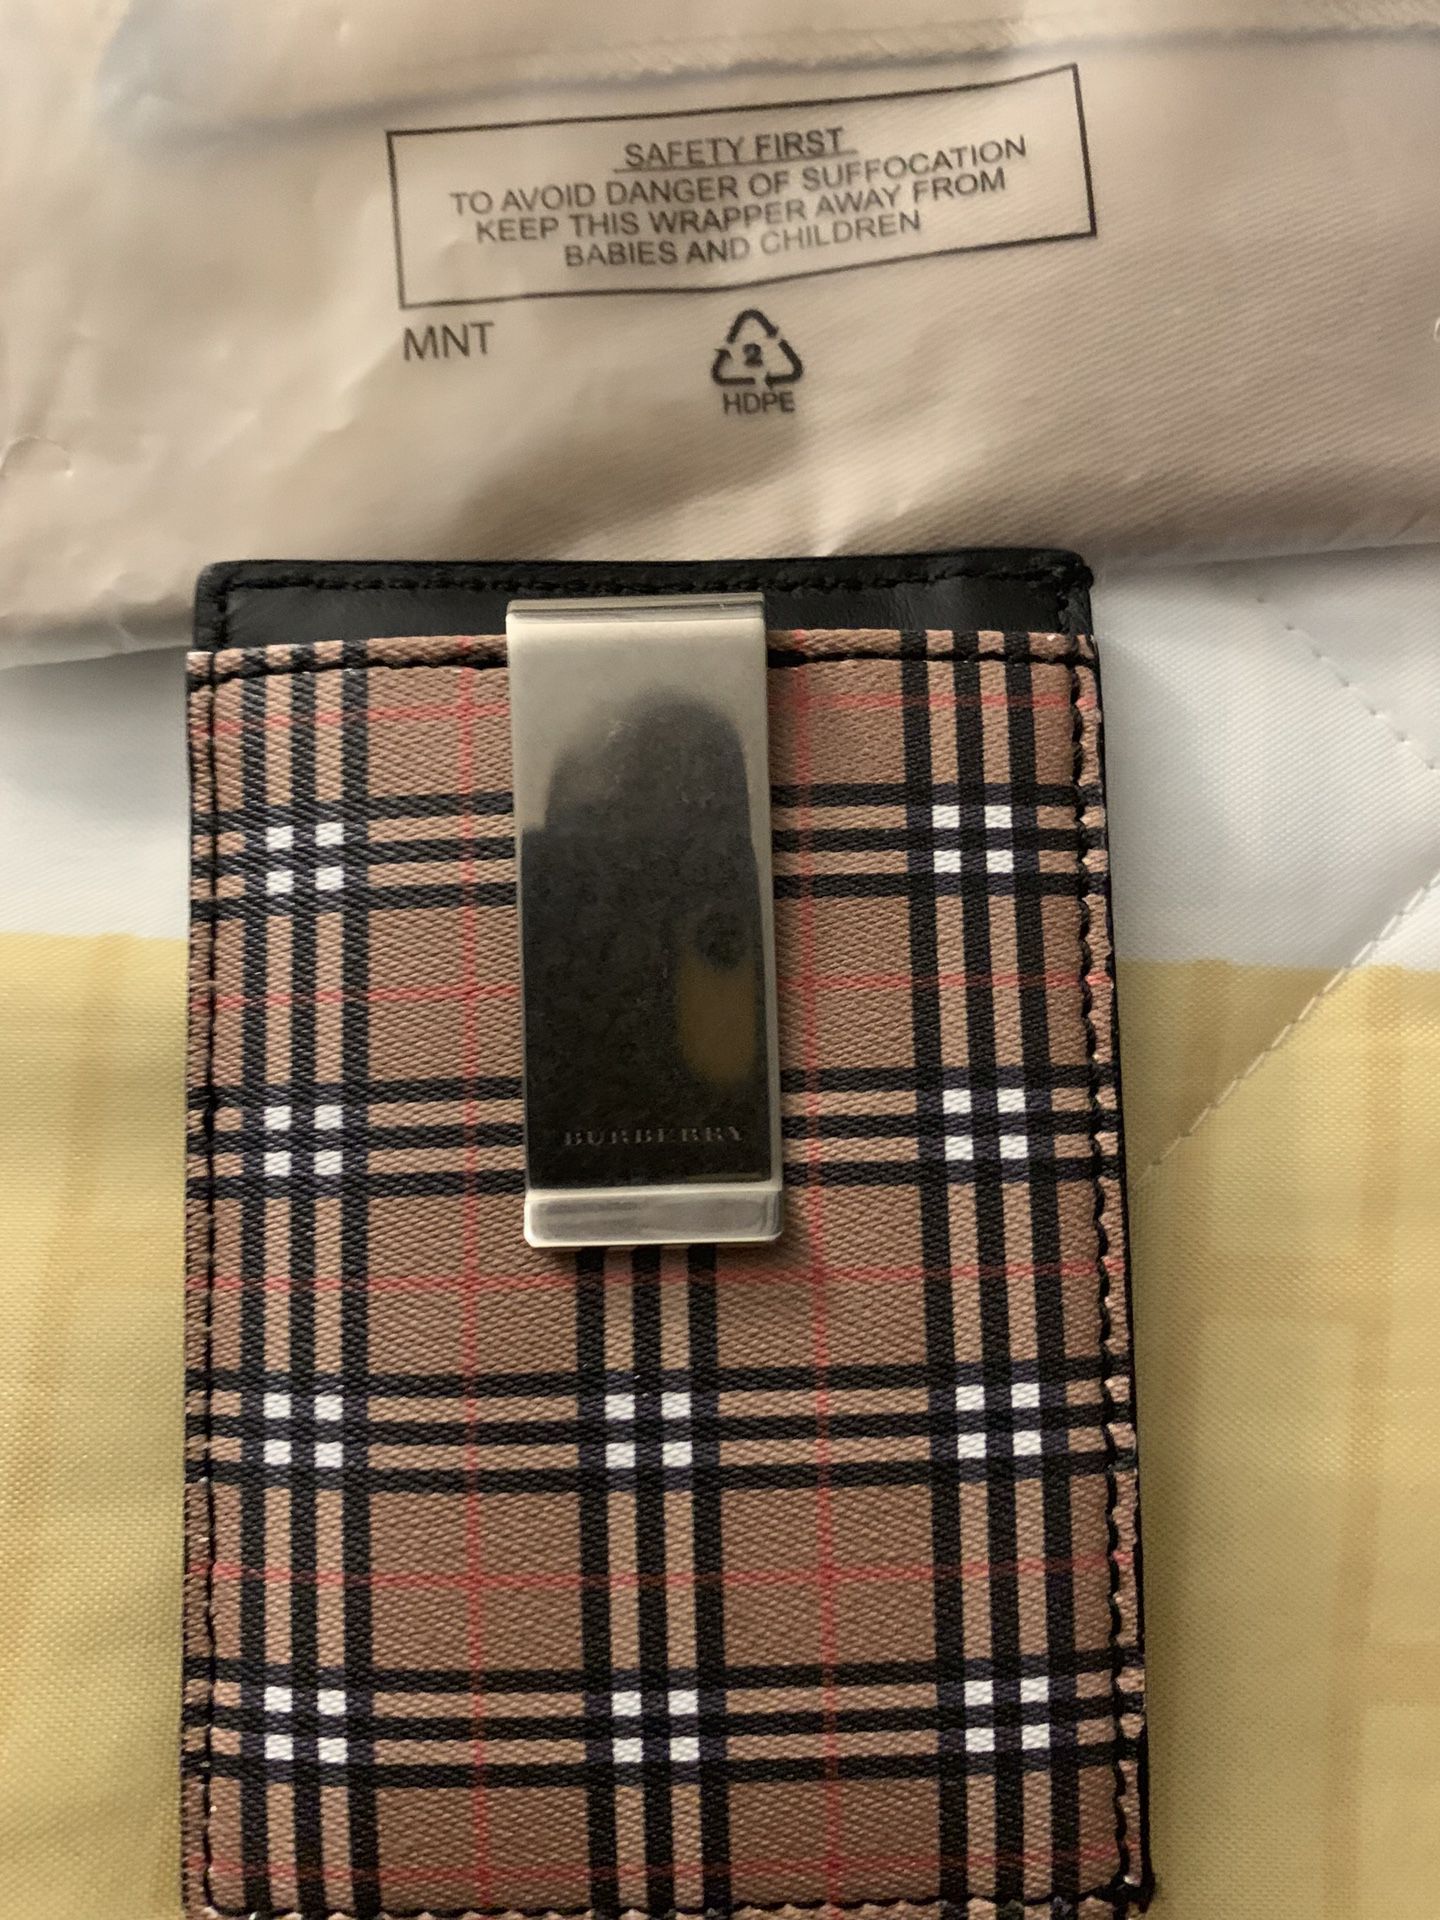 BURBERRY black leather Wallet – To Be Outlet